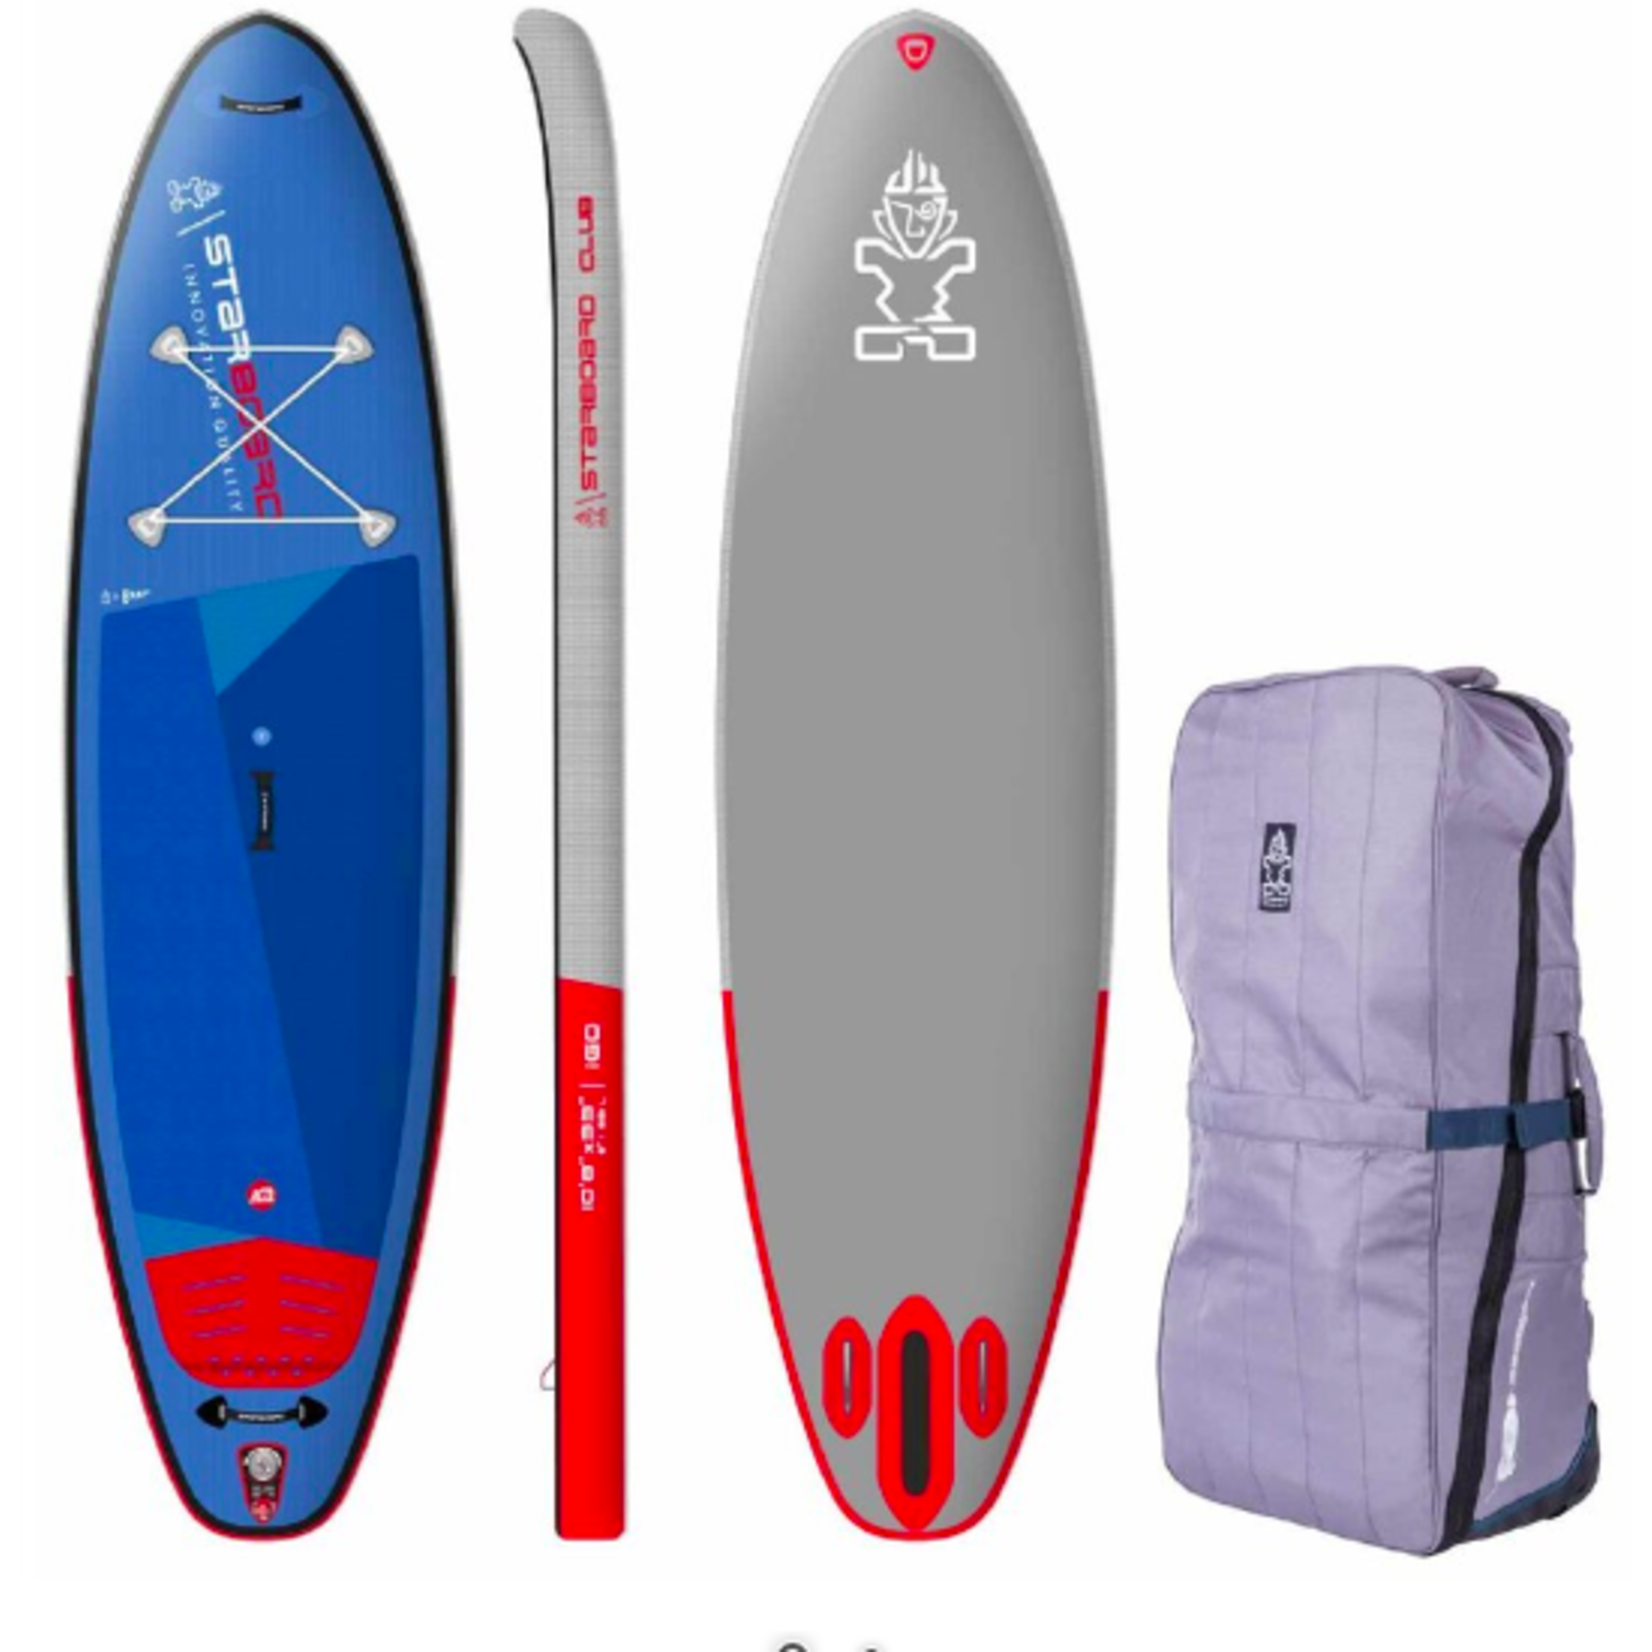 Starboard 10'8 x 33 Starboard Inflatable SUP iGO Club Deluxe SC